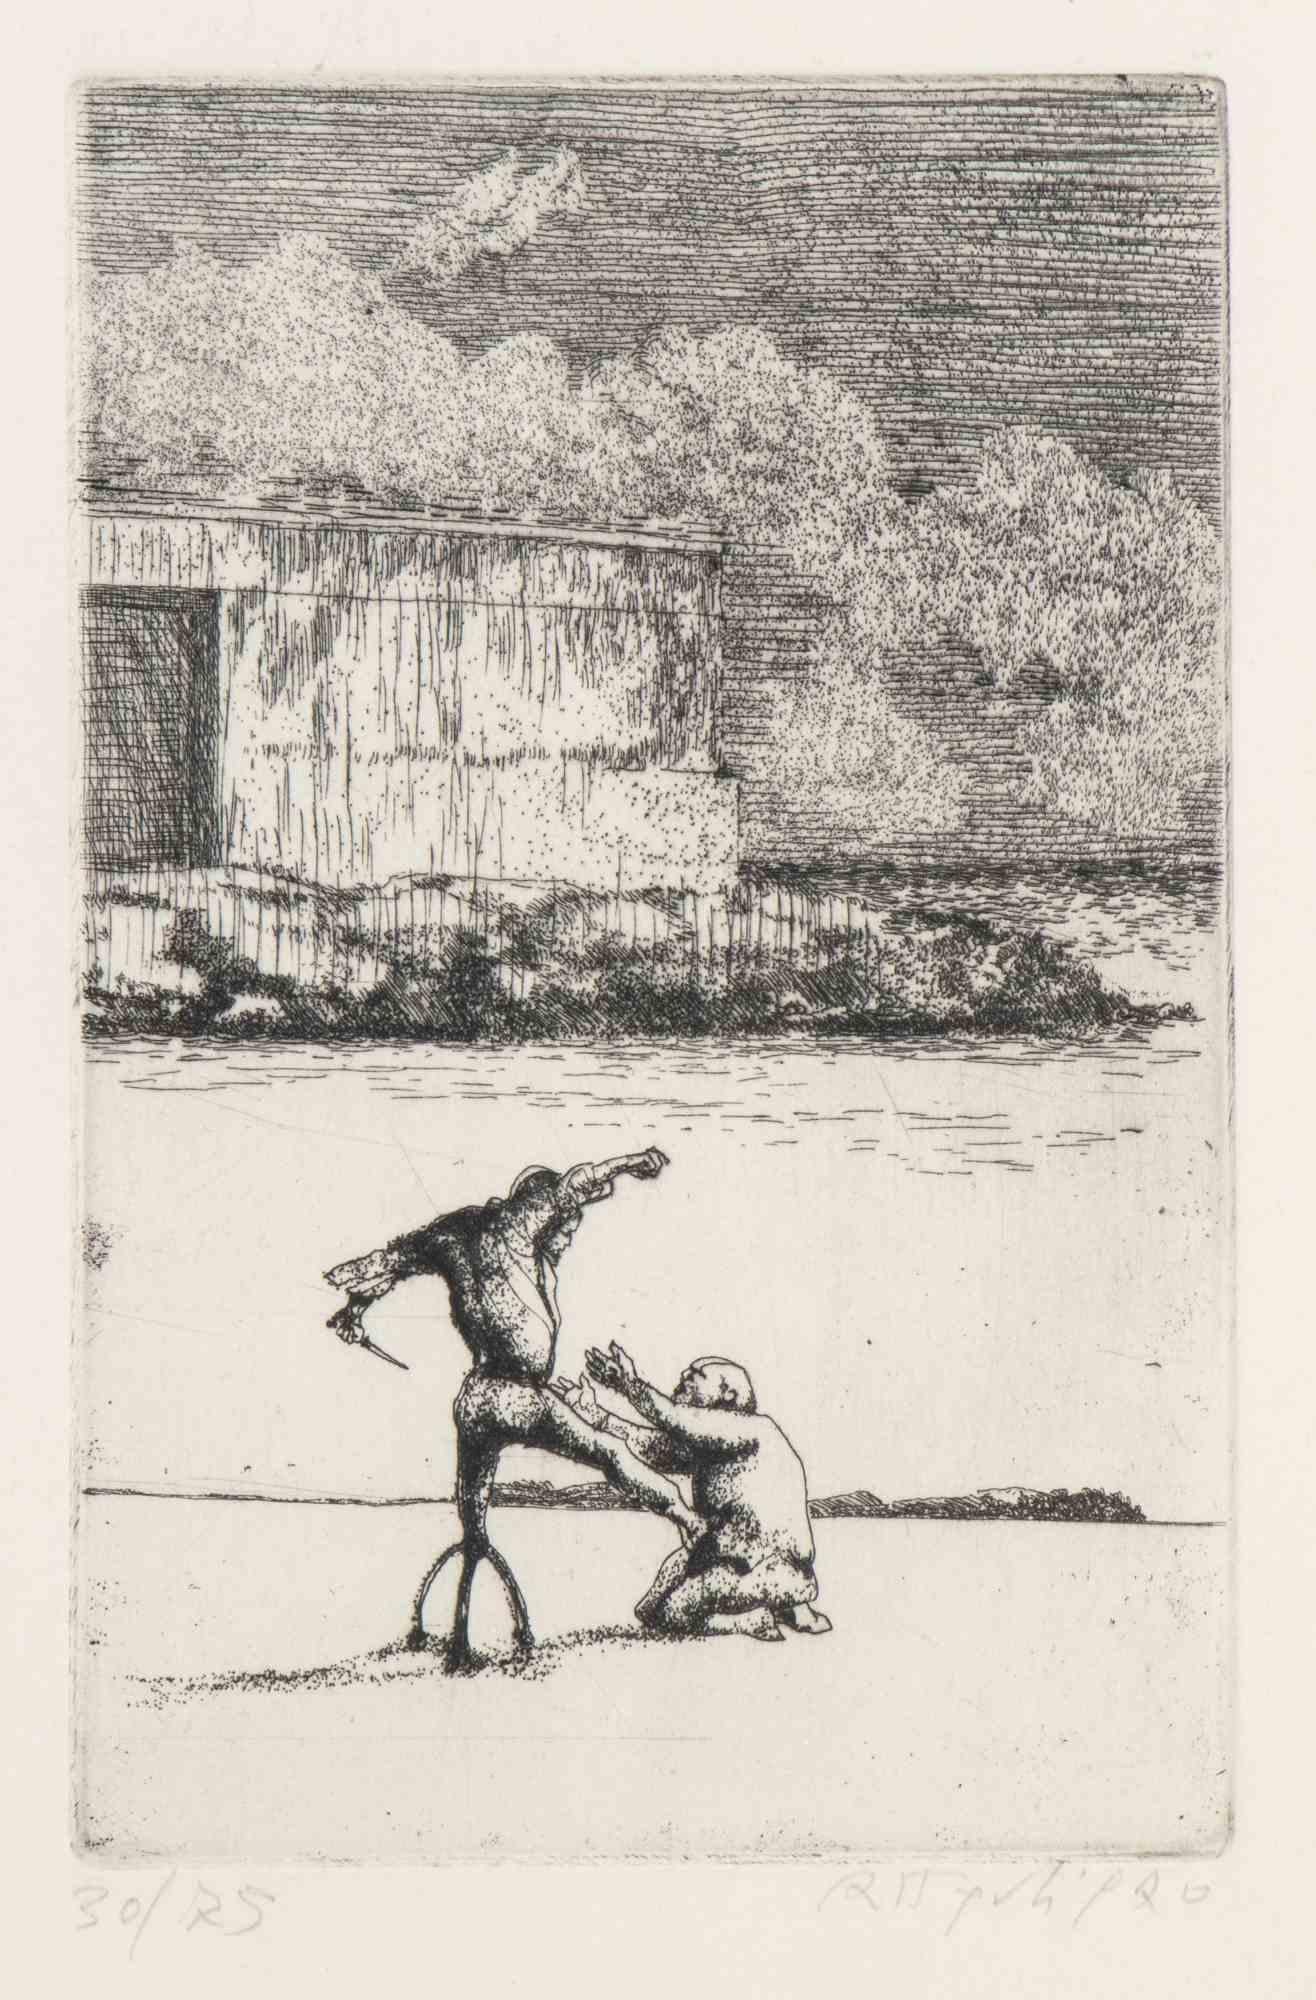 Complete Portfolio of 18 Etchings by Ugo Attardi - 1970s For Sale 3